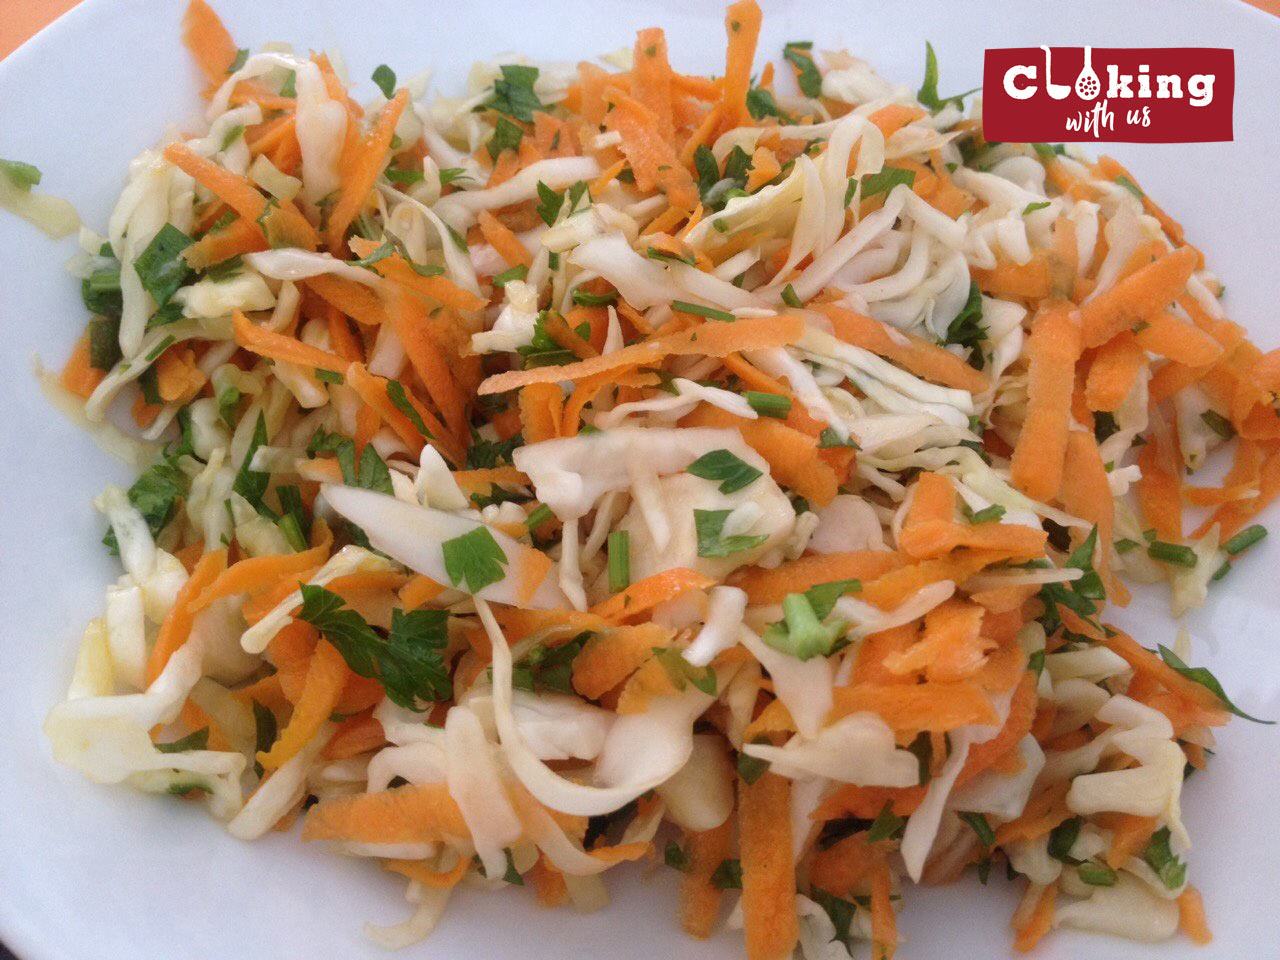 Fresh cabbage and carrots salad